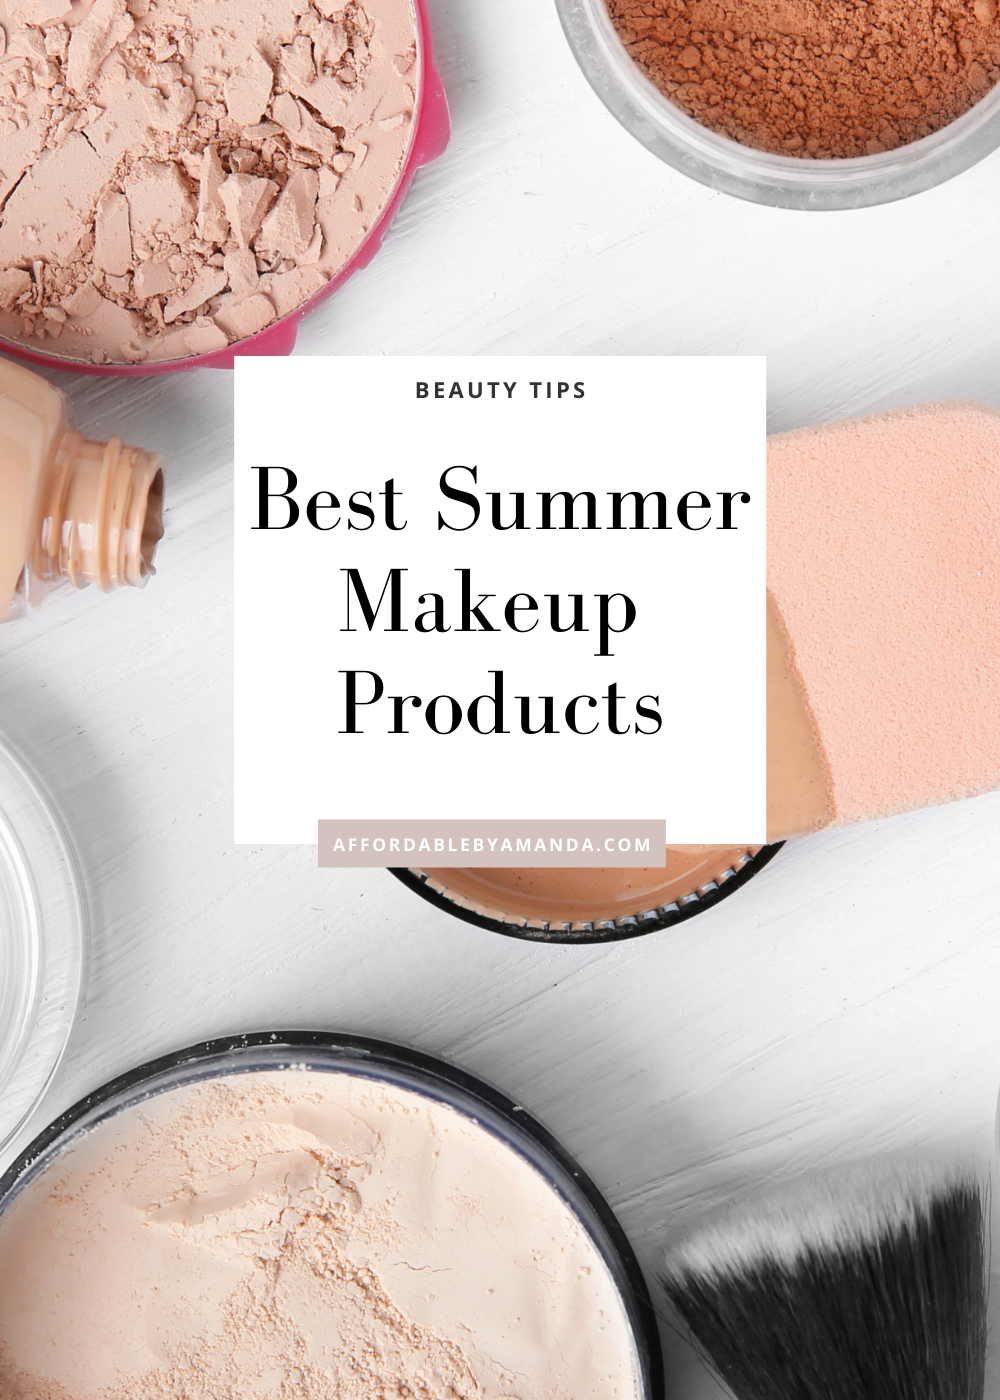 Best Summer Makeup Products 2022